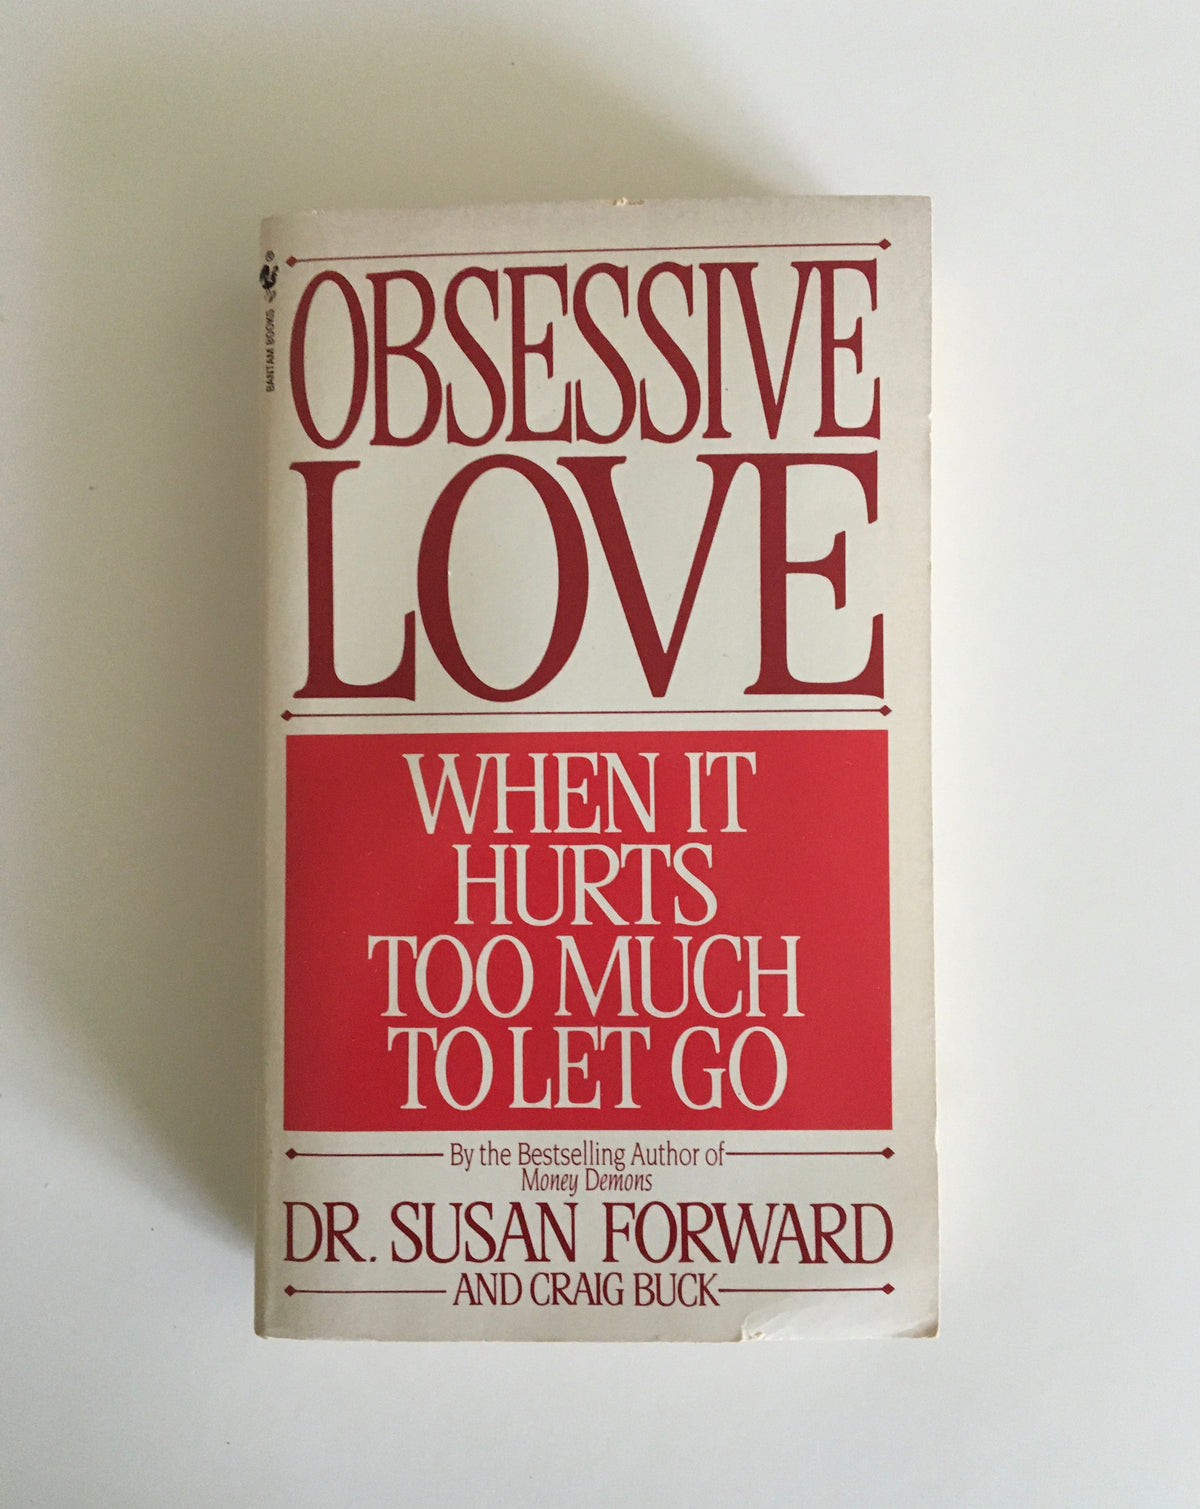 Obsessive Love by Harriet Lerner